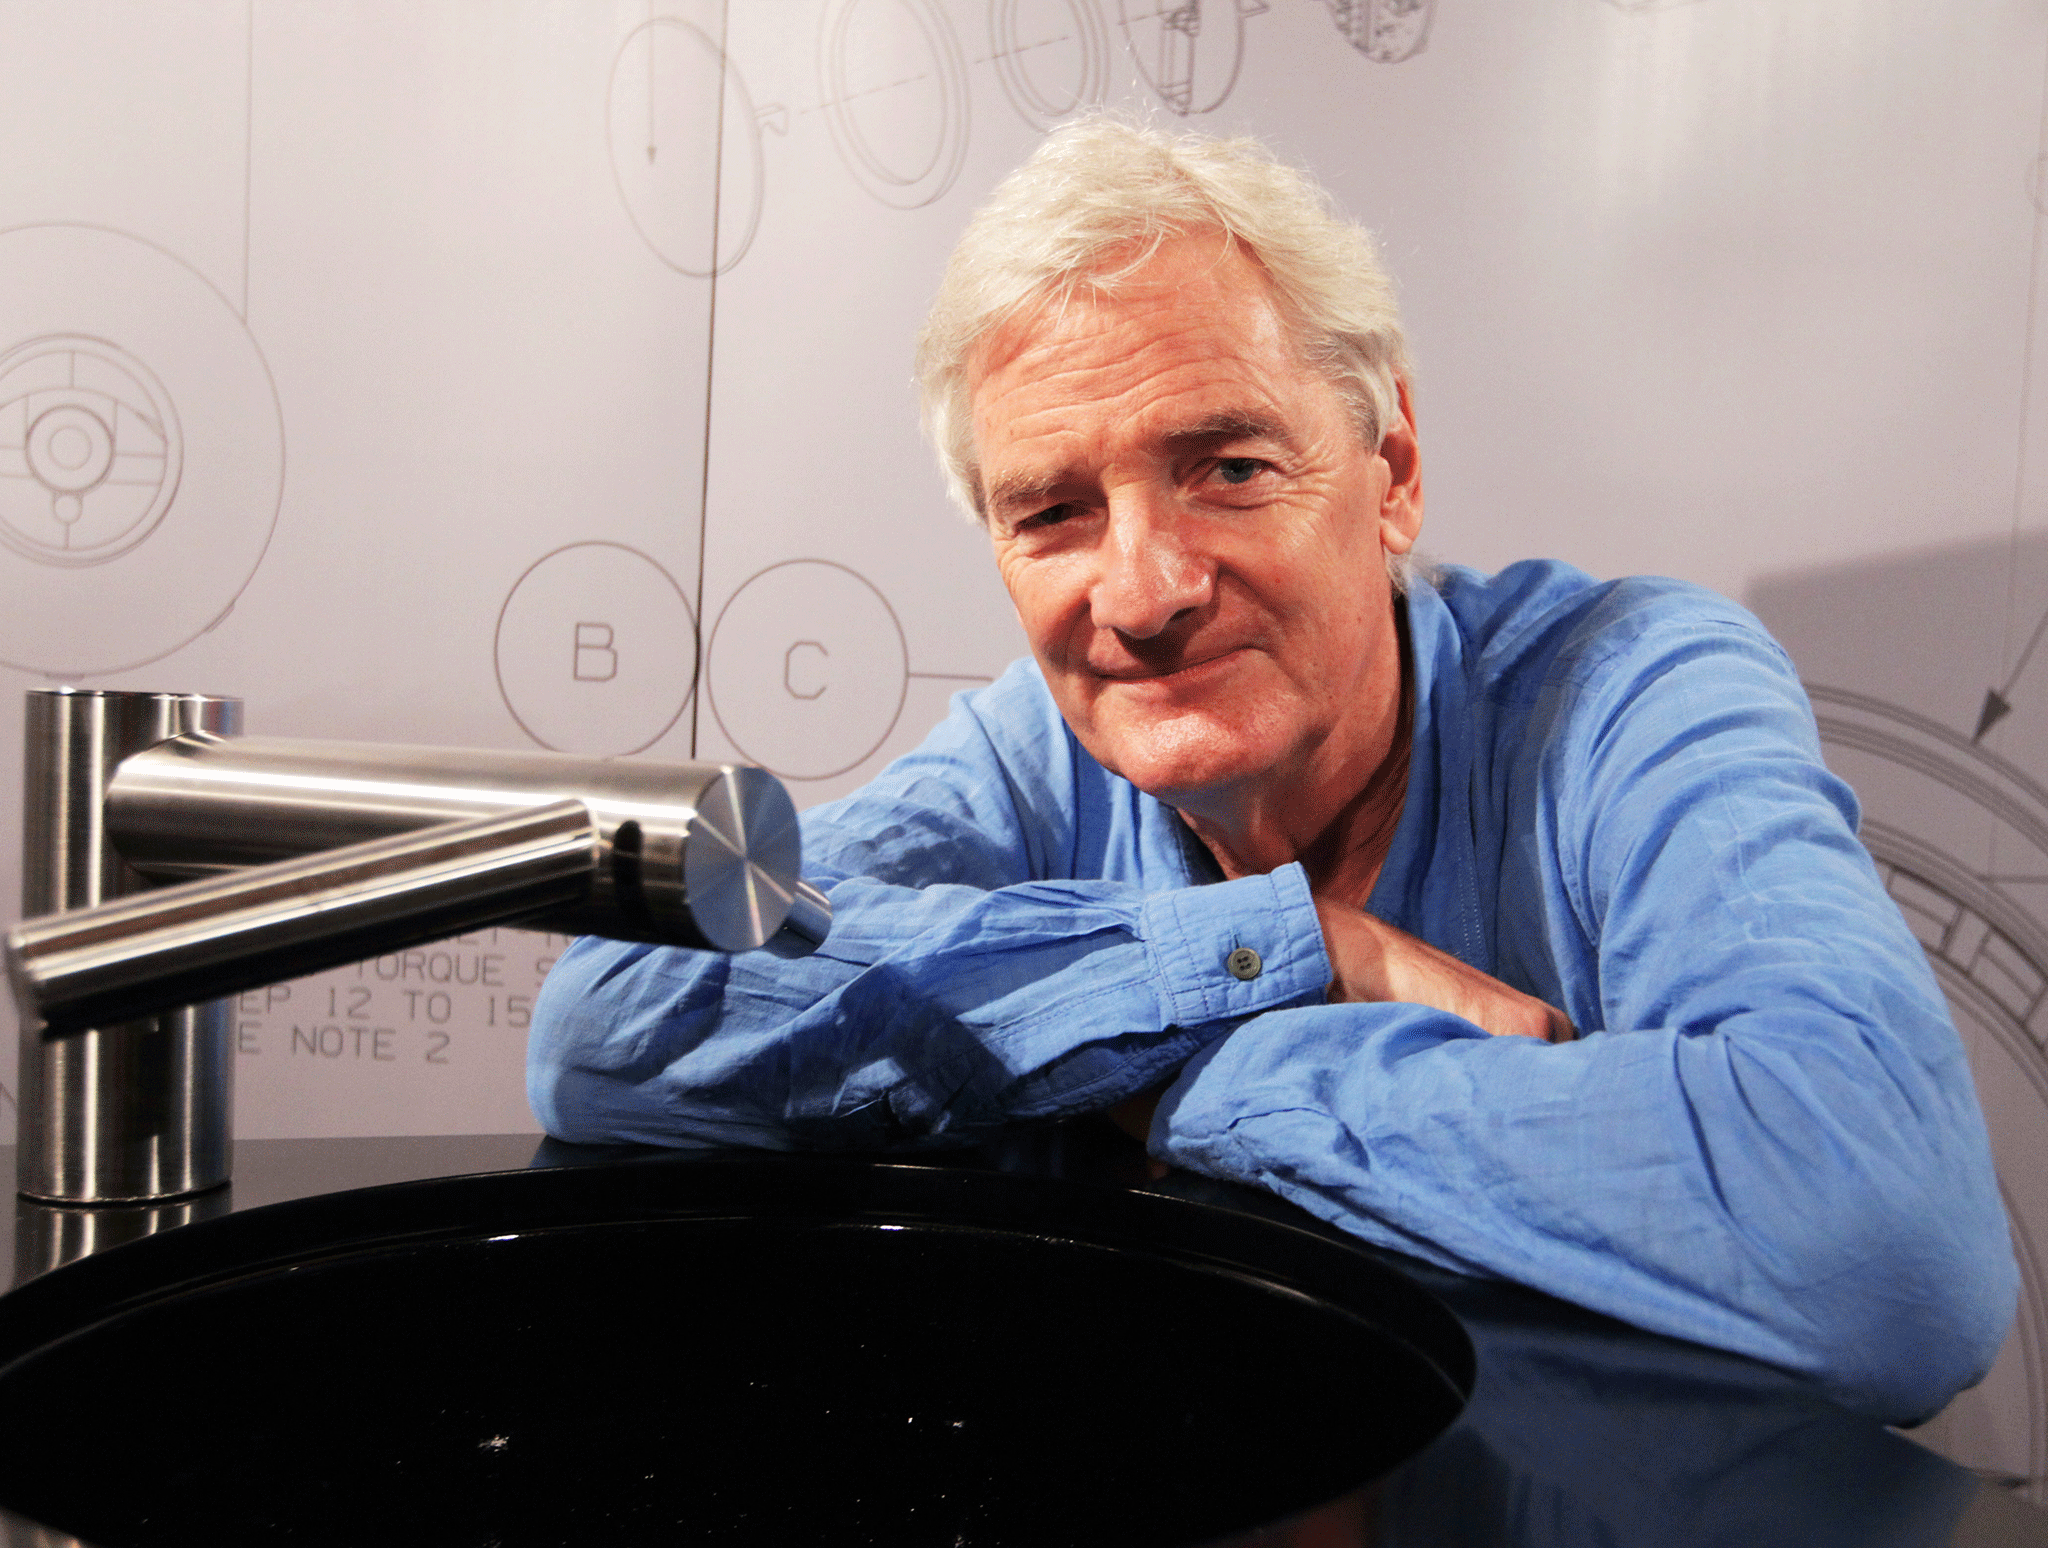 James Dyson aims to put electric cars on the UK's streets by 2020